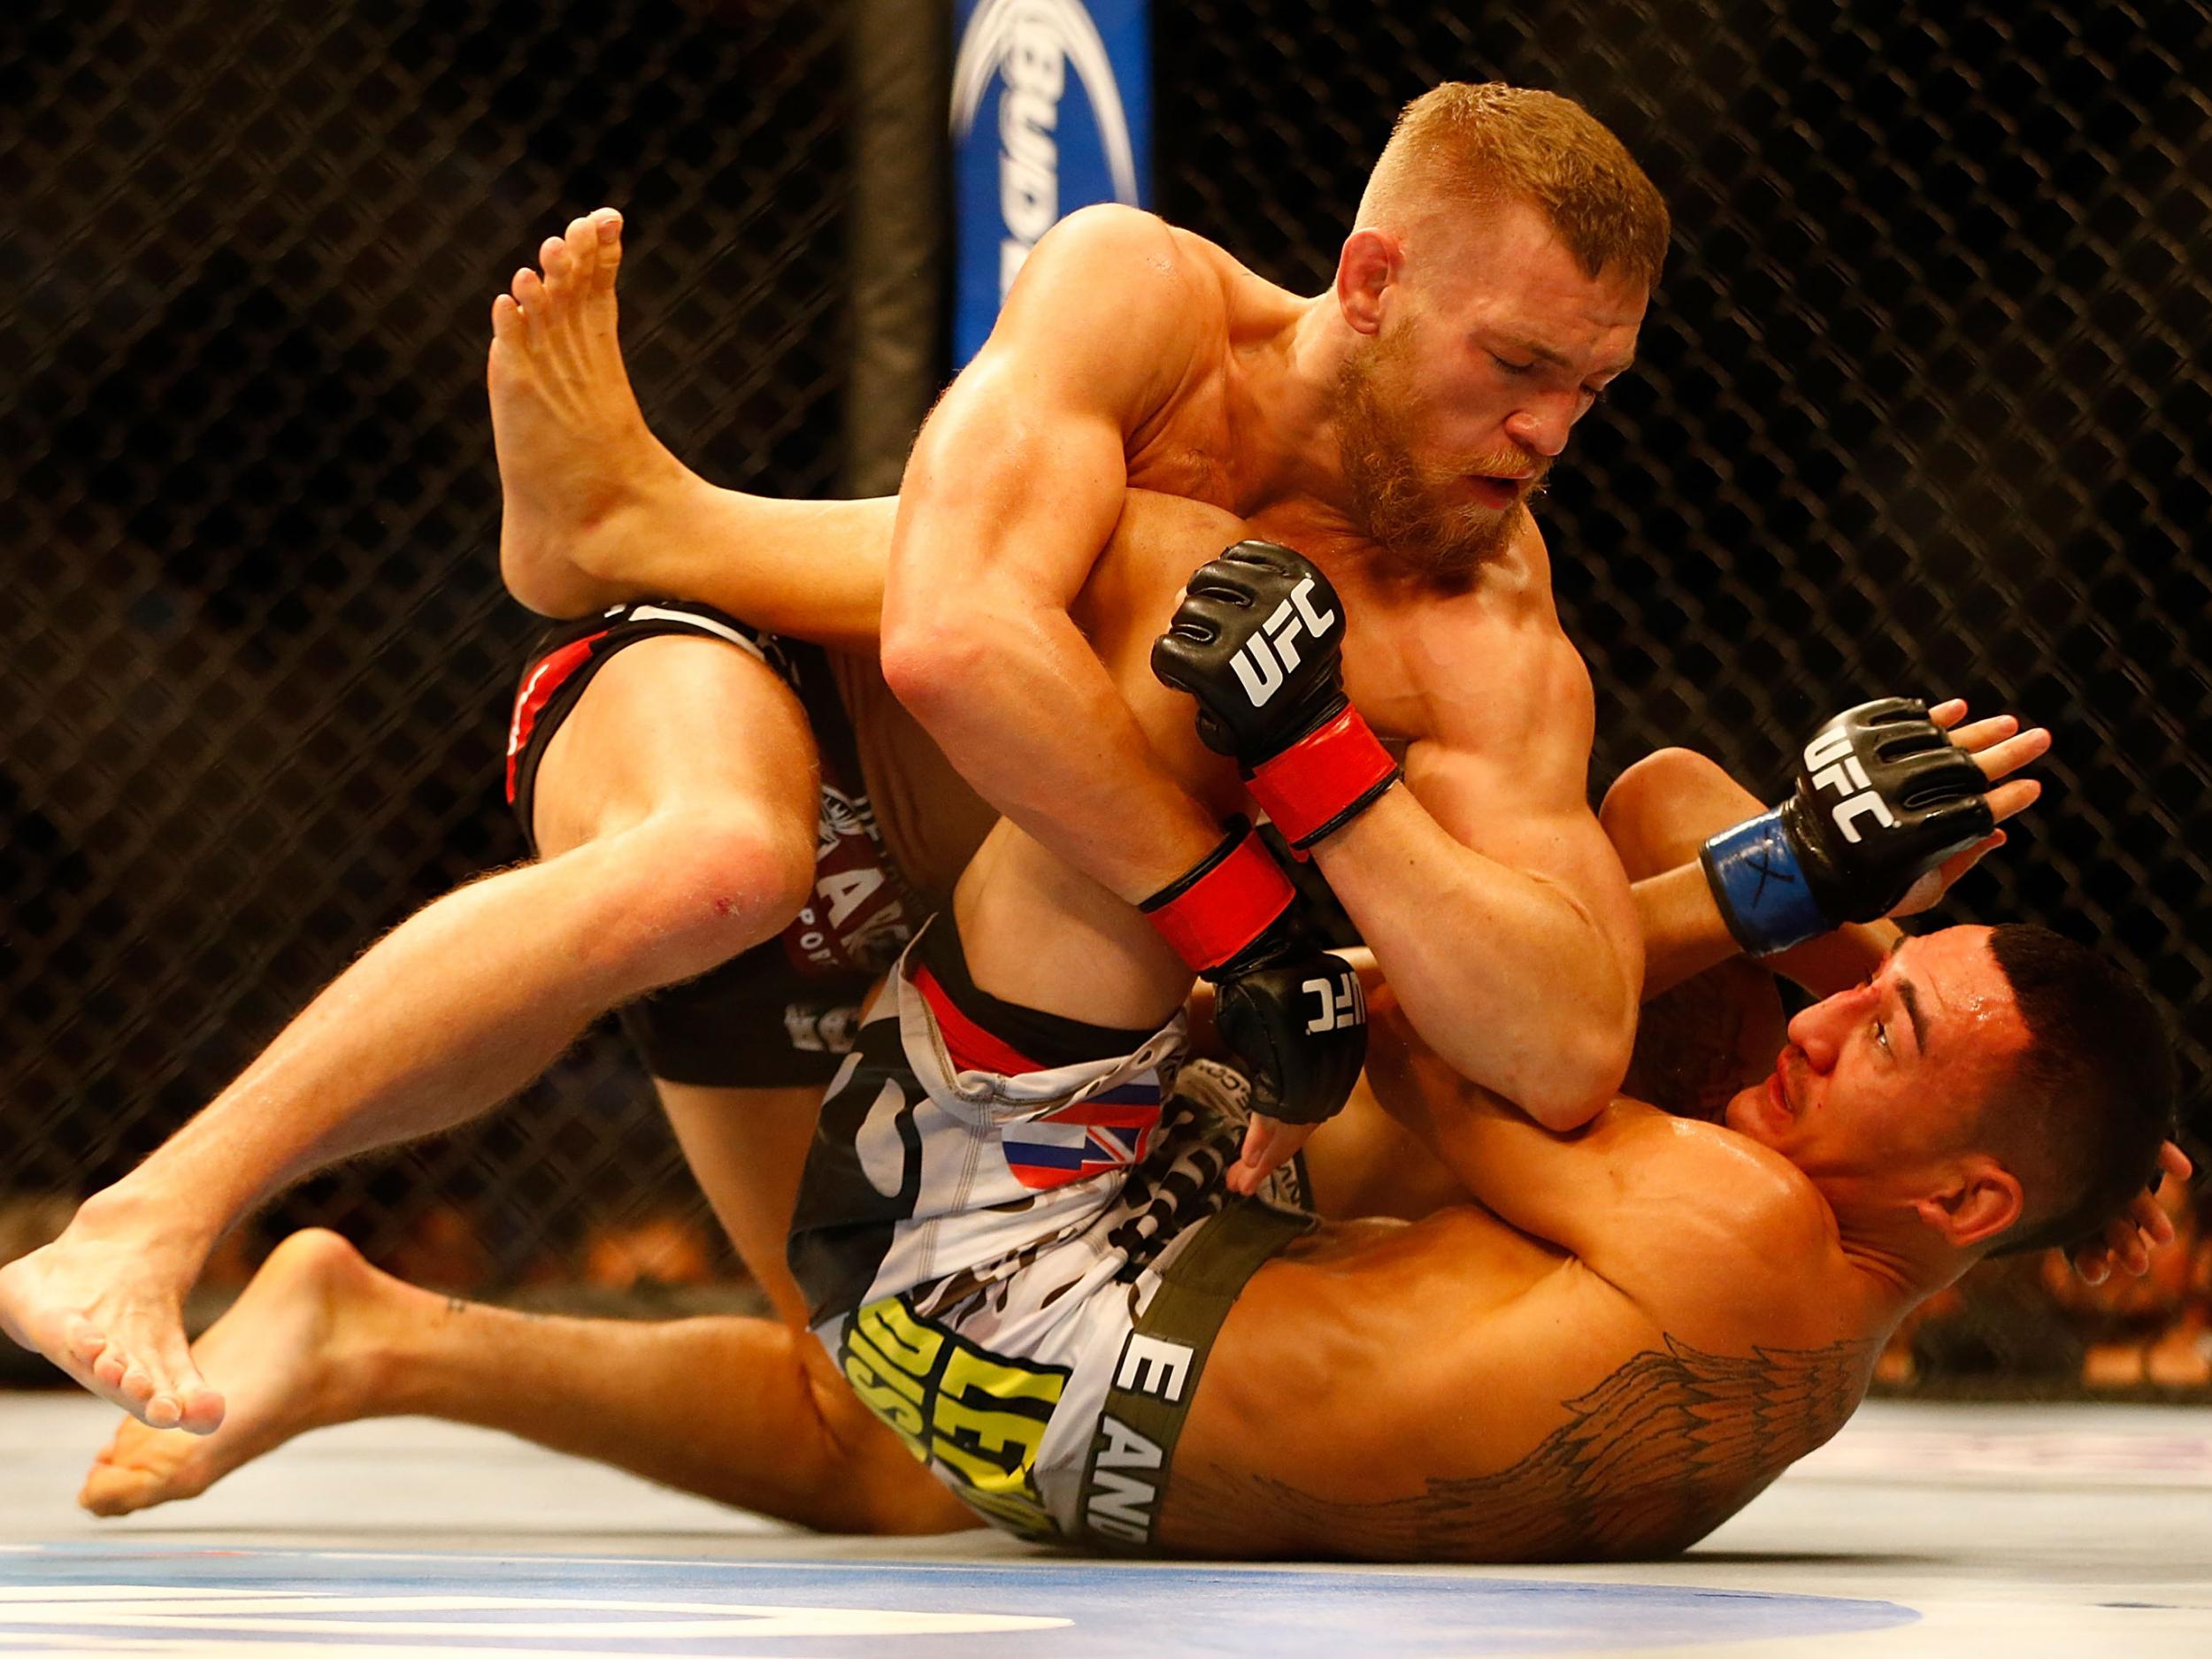 McGregor fighting Holloway at UFC Boston in August 2013